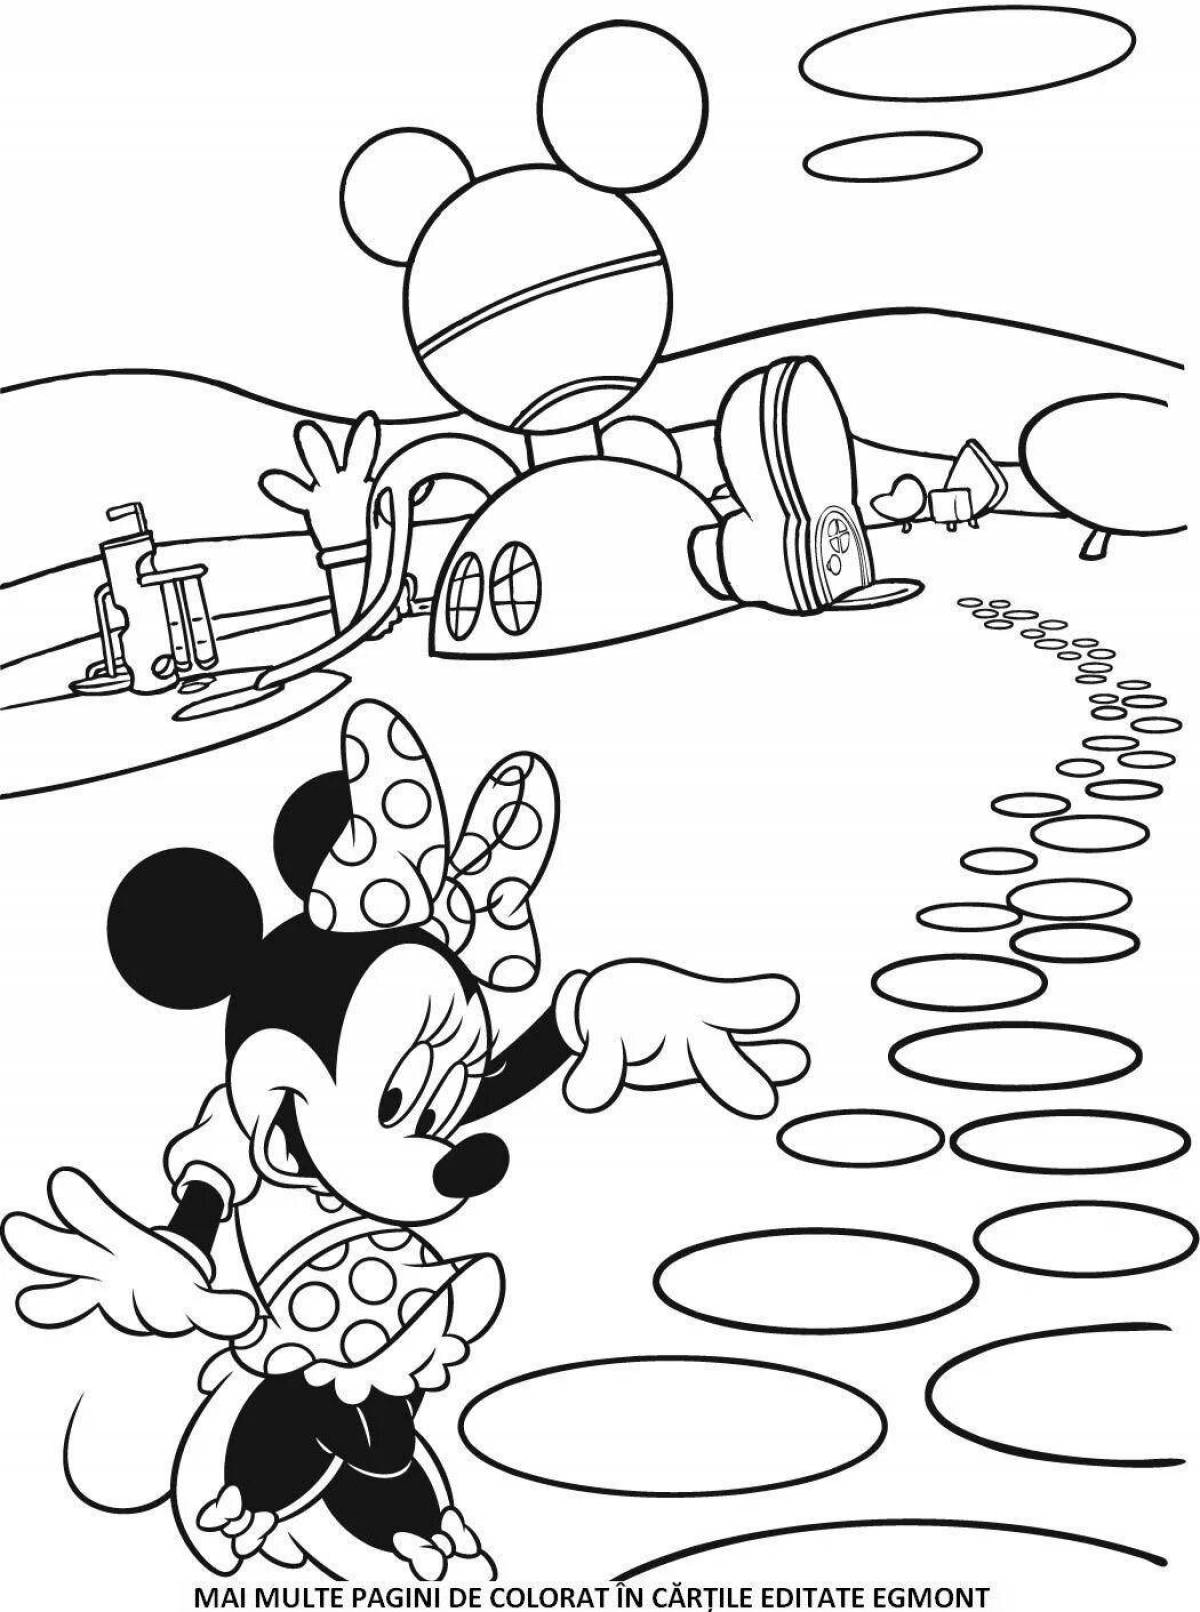 Minnie mouse playful coloring for kids